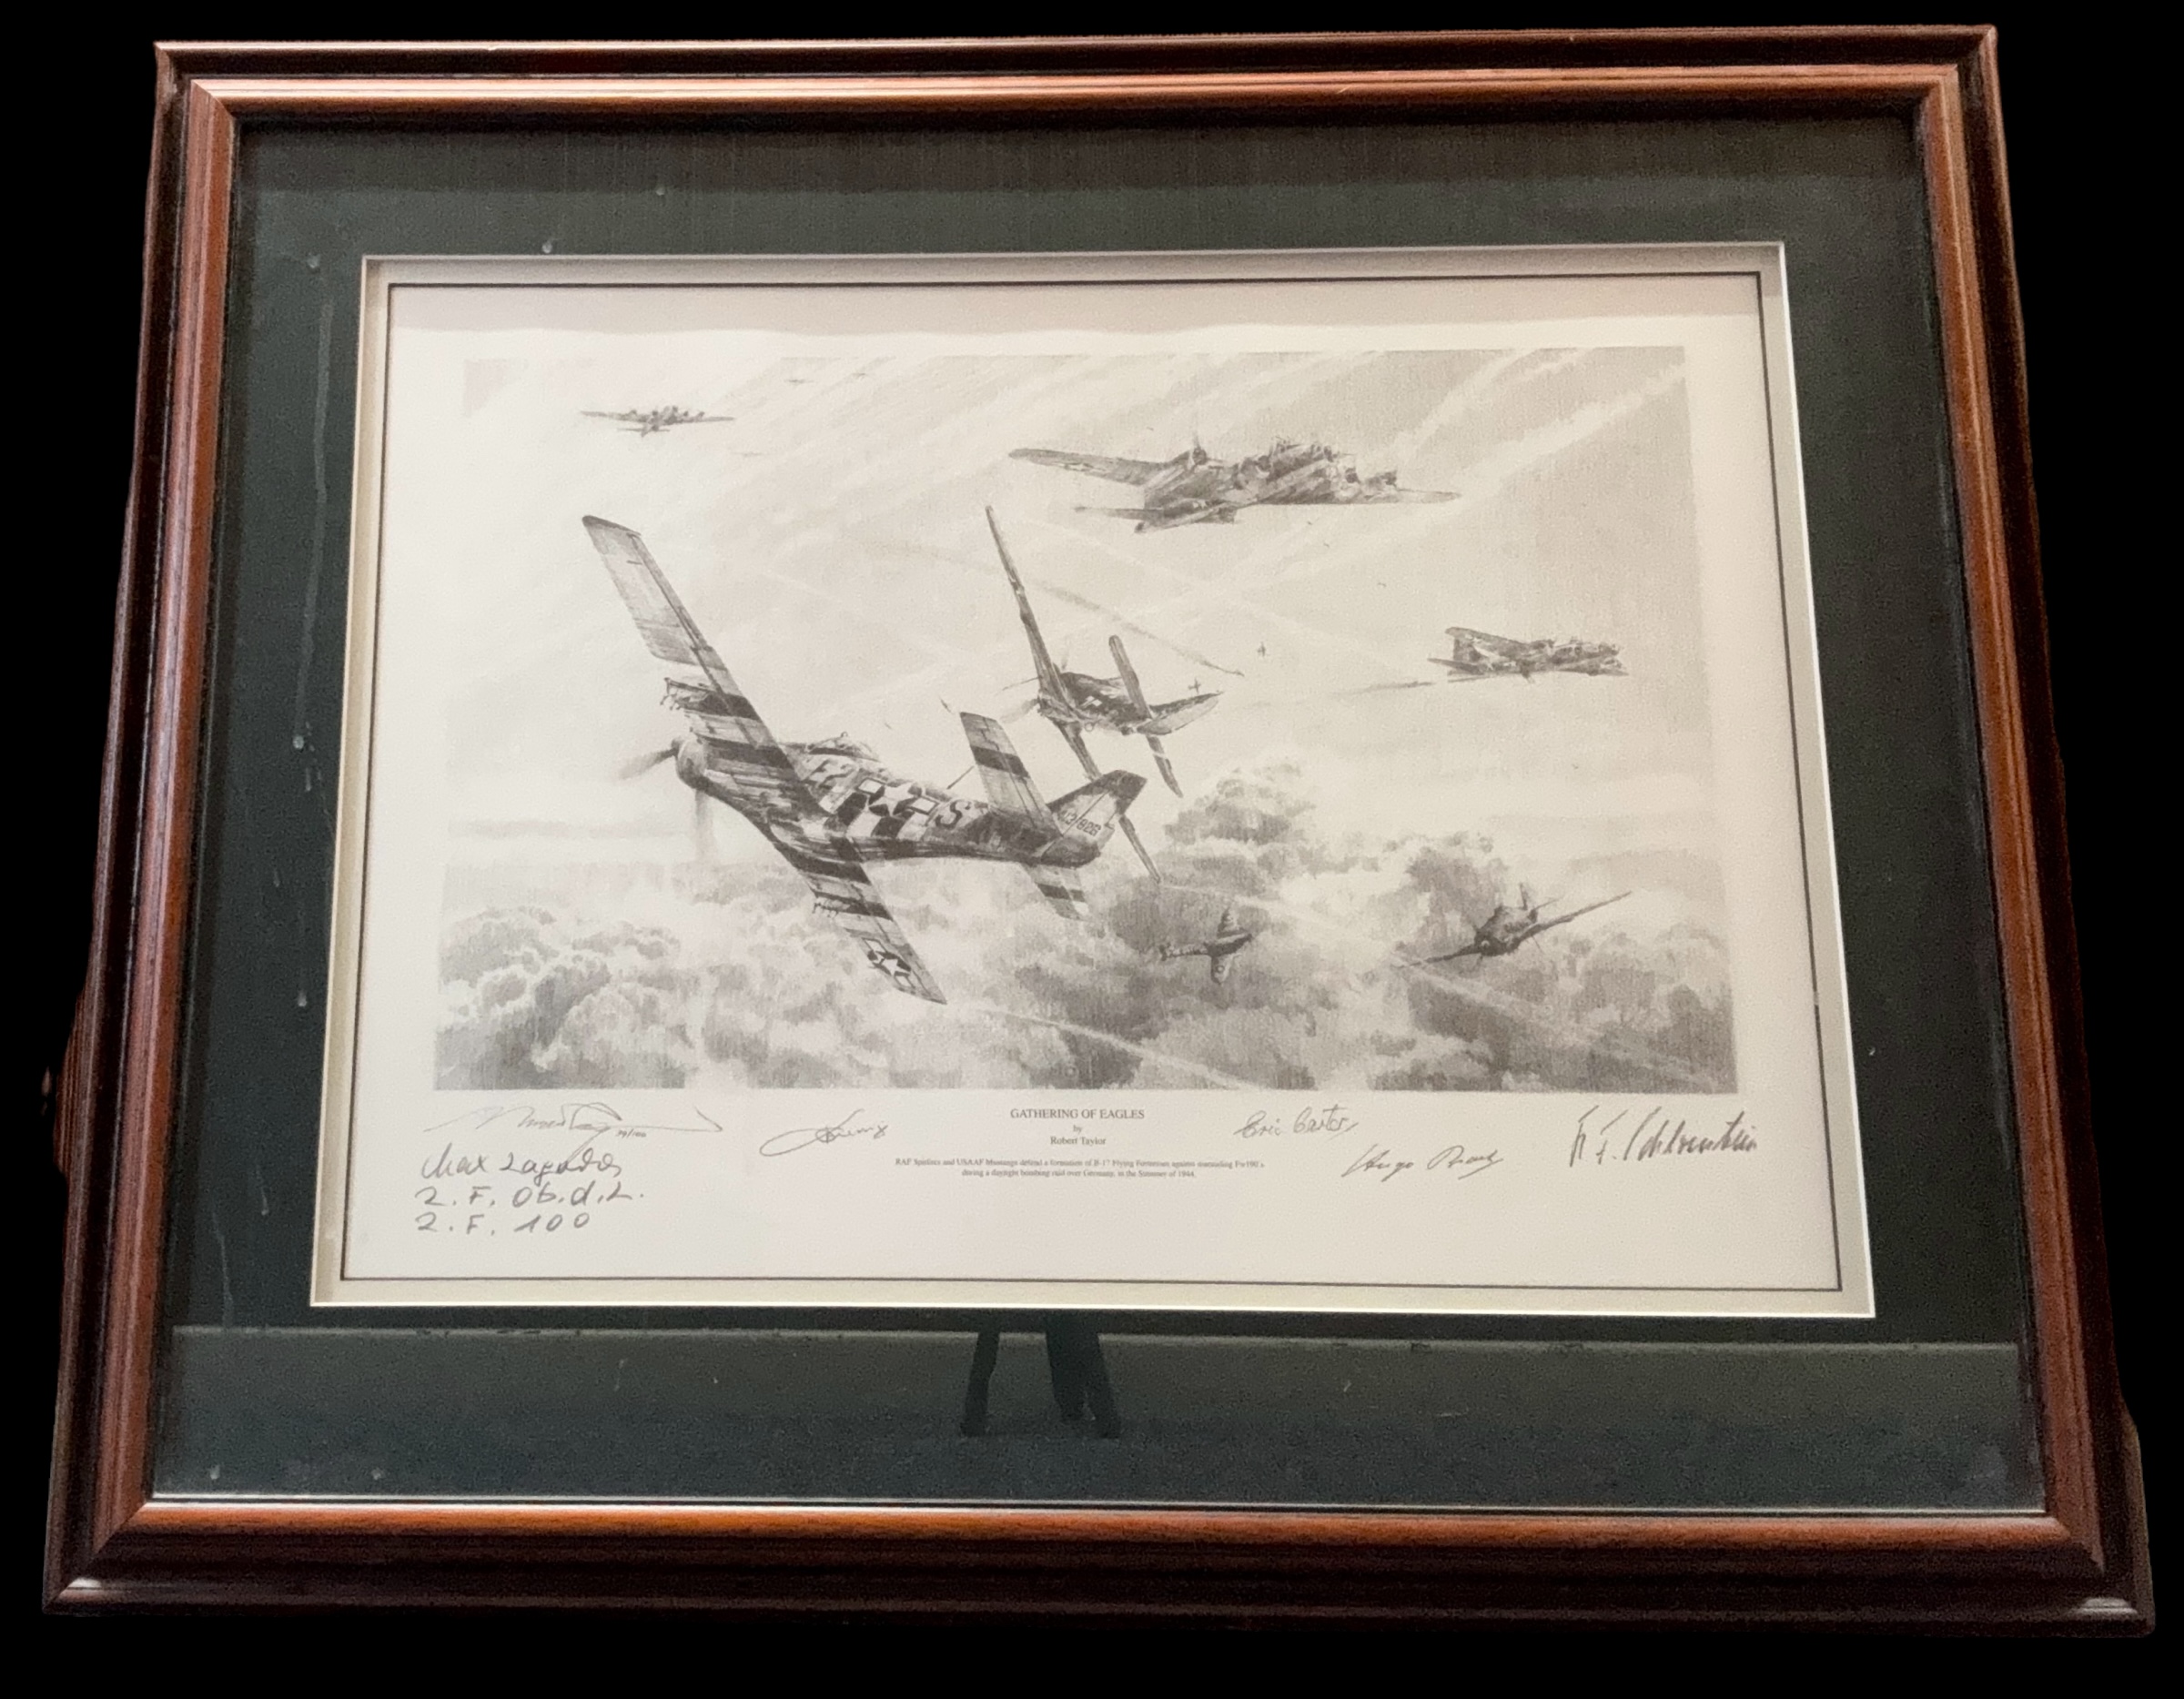 Gathering of Eagles Aces High Edition WWII multi signed 31x25 mounted and framed print 5, signatures - Image 3 of 3